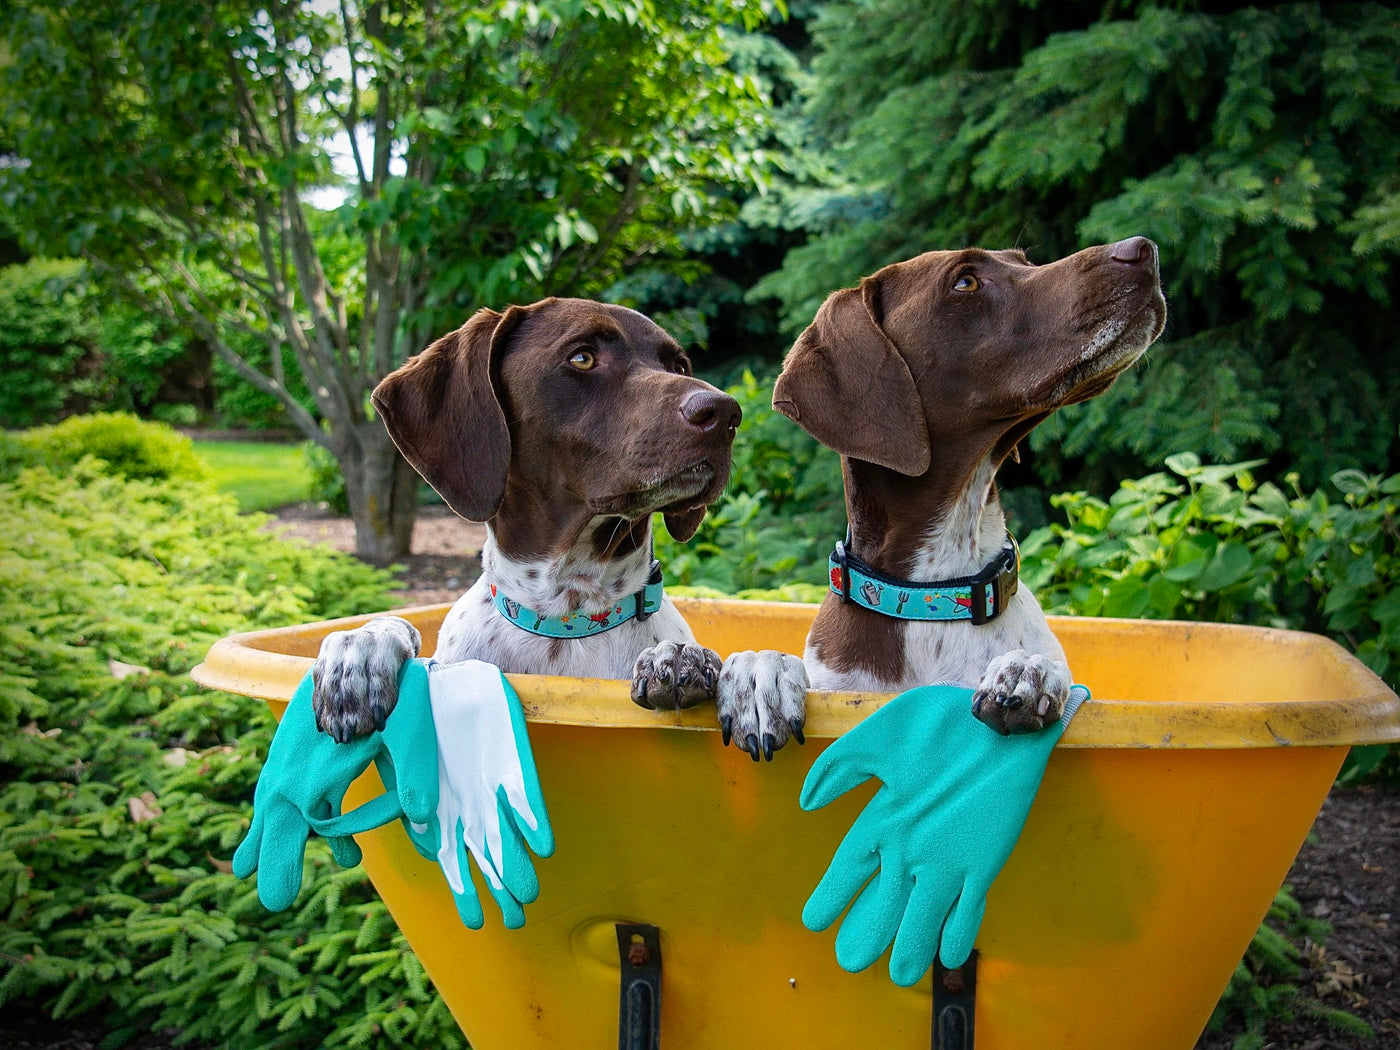 two dogs with collars in wheelbarrow sitting in garden